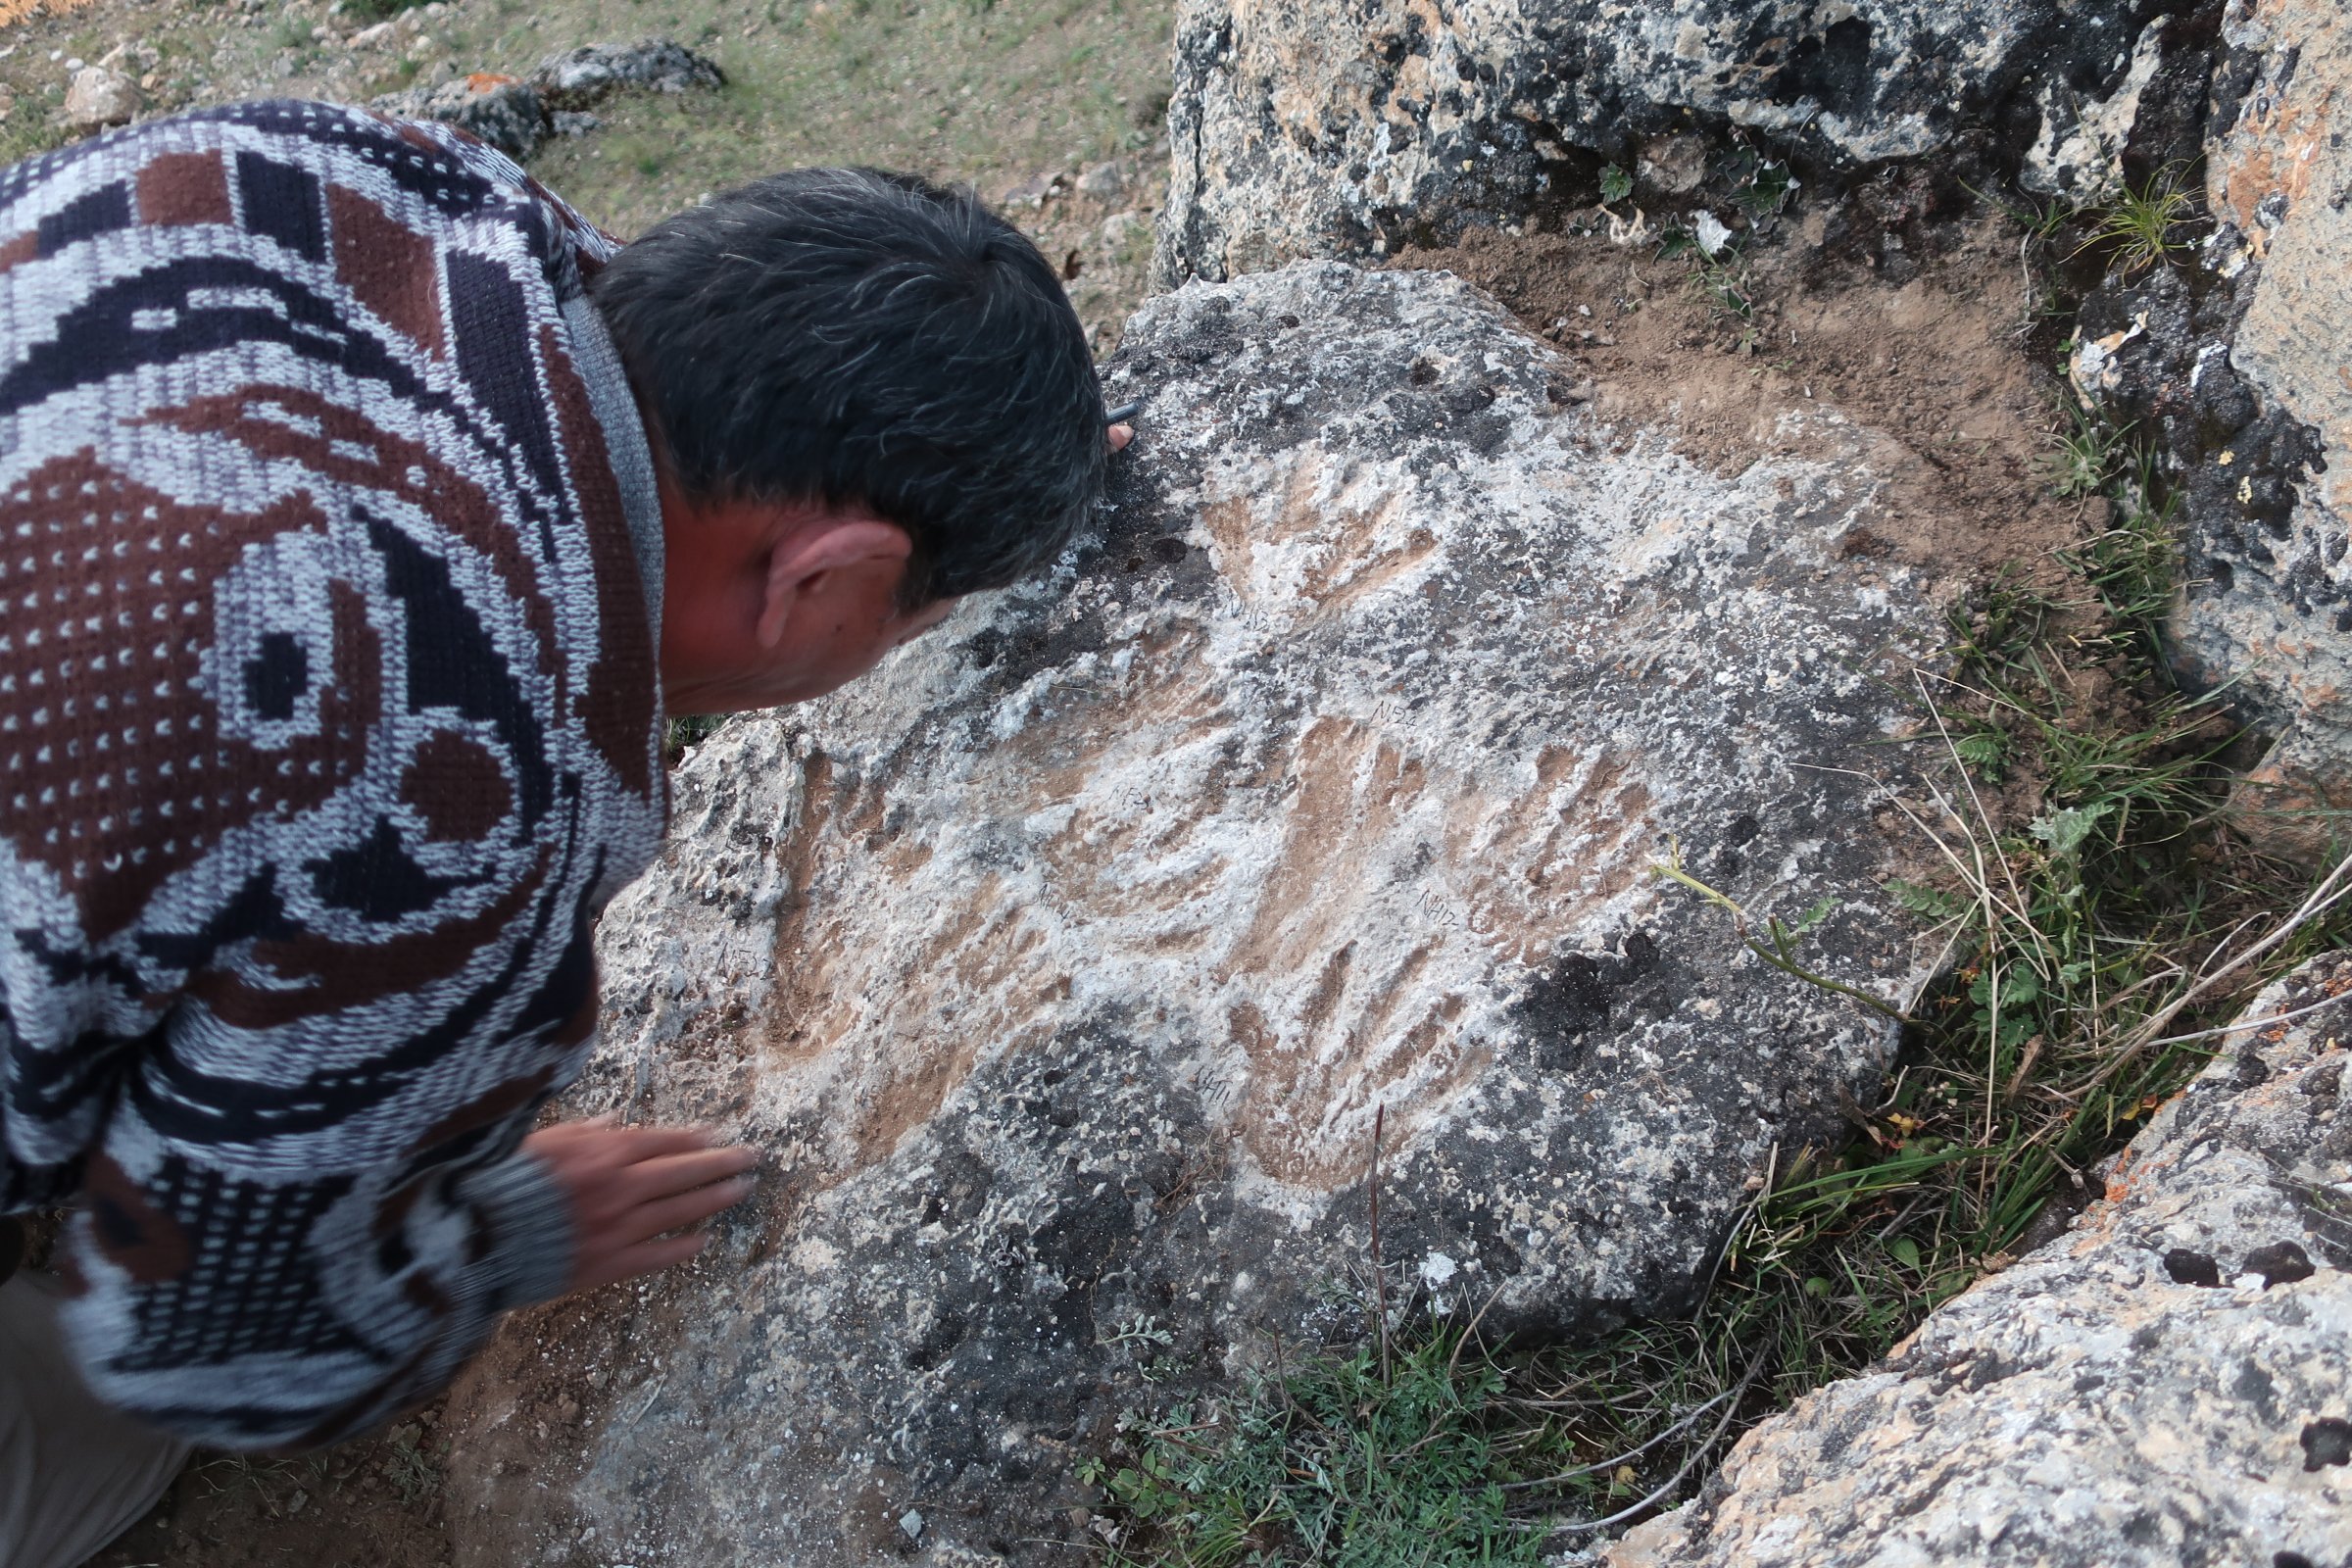 Dr. David Zhang, a scientist from Guangzhou University in China, examines the footprints and handprints on the travertine rock in Quesang, Tibet. These impressions are thought to be the world's oldest parietal art.